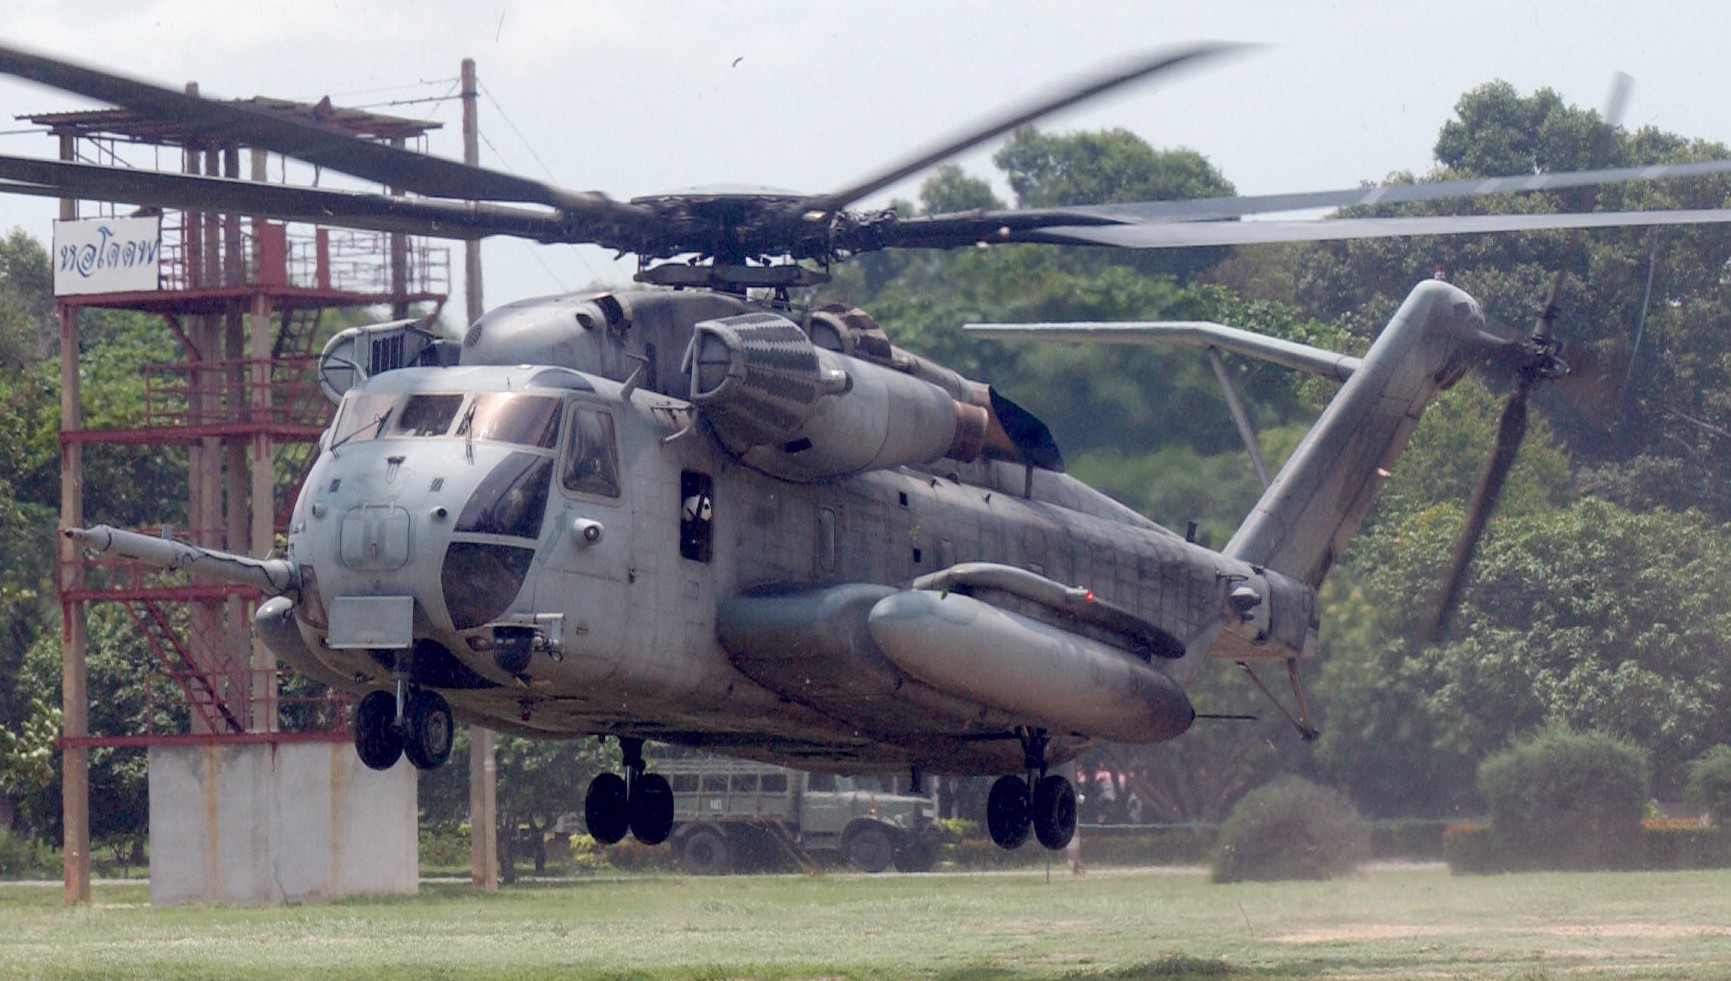 hmh-363 red lions marine heavy helicopter squadron usmc sikorsky ch-53d sea stallion 23 exercise cobra gold thailand